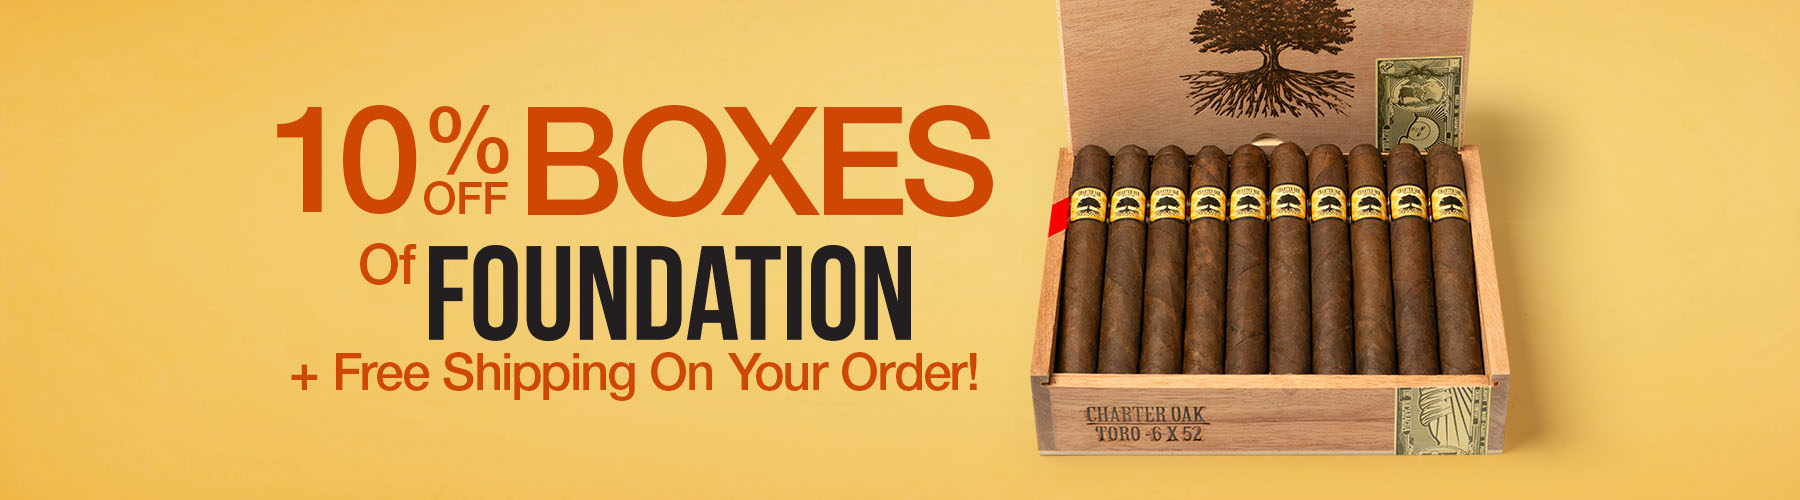 10% off Boxes of Foundation + Free Shipping on your order!